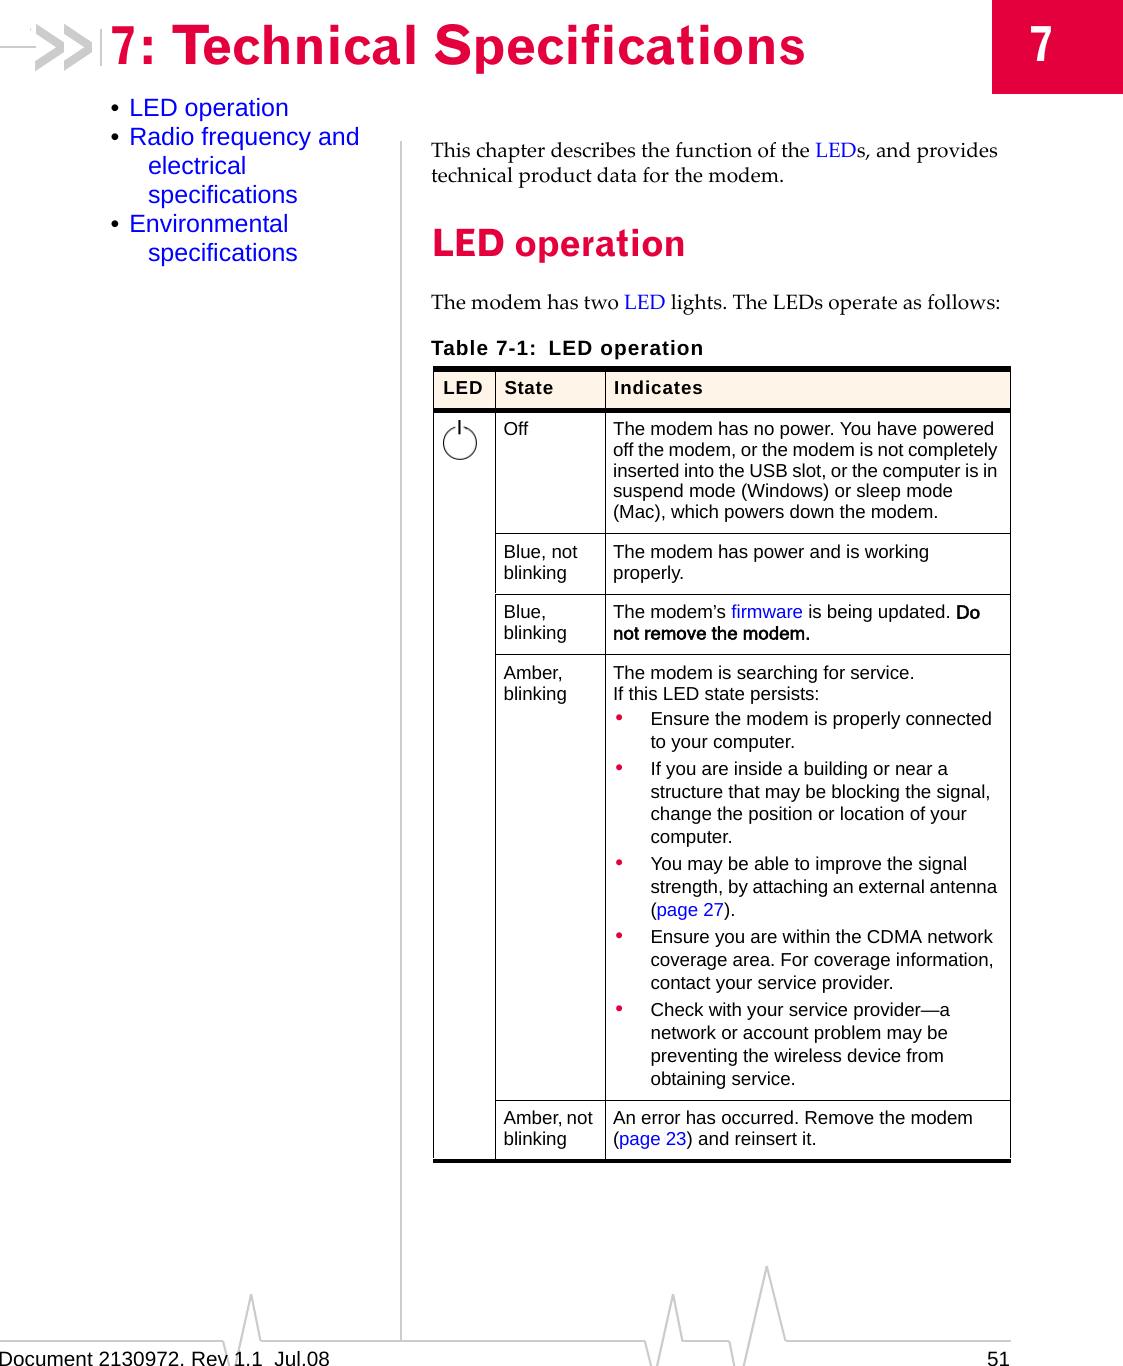 Document 2130972. Rev 1.1  Jul.08 5177: Technical Specifications•LED operation•Radio frequency and electrical specifications•Environmental specificationsThischapterdescribesthefunctionoftheLEDs,andprovidestechnicalproductdataforthemodem.LED operationThemodemhastwoLEDlights.TheLEDsoperateasfollows:Table 7-1: LED operationLED State IndicatesOff The modem has no power. You have powered off the modem, or the modem is not completely inserted into the USB slot, or the computer is in suspend mode (Windows) or sleep mode (Mac), which powers down the modem.Blue, not blinking The modem has power and is working properly.Blue, blinking The modem’s firmware is being updated. Do not remove the modem.Amber, blinking The modem is searching for service.If this LED state persists:•Ensure the modem is properly connected to your computer.•If you are inside a building or near a structure that may be blocking the signal, change the position or location of your computer.•You may be able to improve the signal strength, by attaching an external antenna (page 27).•Ensure you are within the CDMA network coverage area. For coverage information, contact your service provider.•Check with your service provider—a network or account problem may be preventing the wireless device from obtaining service.Amber, not blinking An error has occurred. Remove the modem (page 23) and reinsert it.